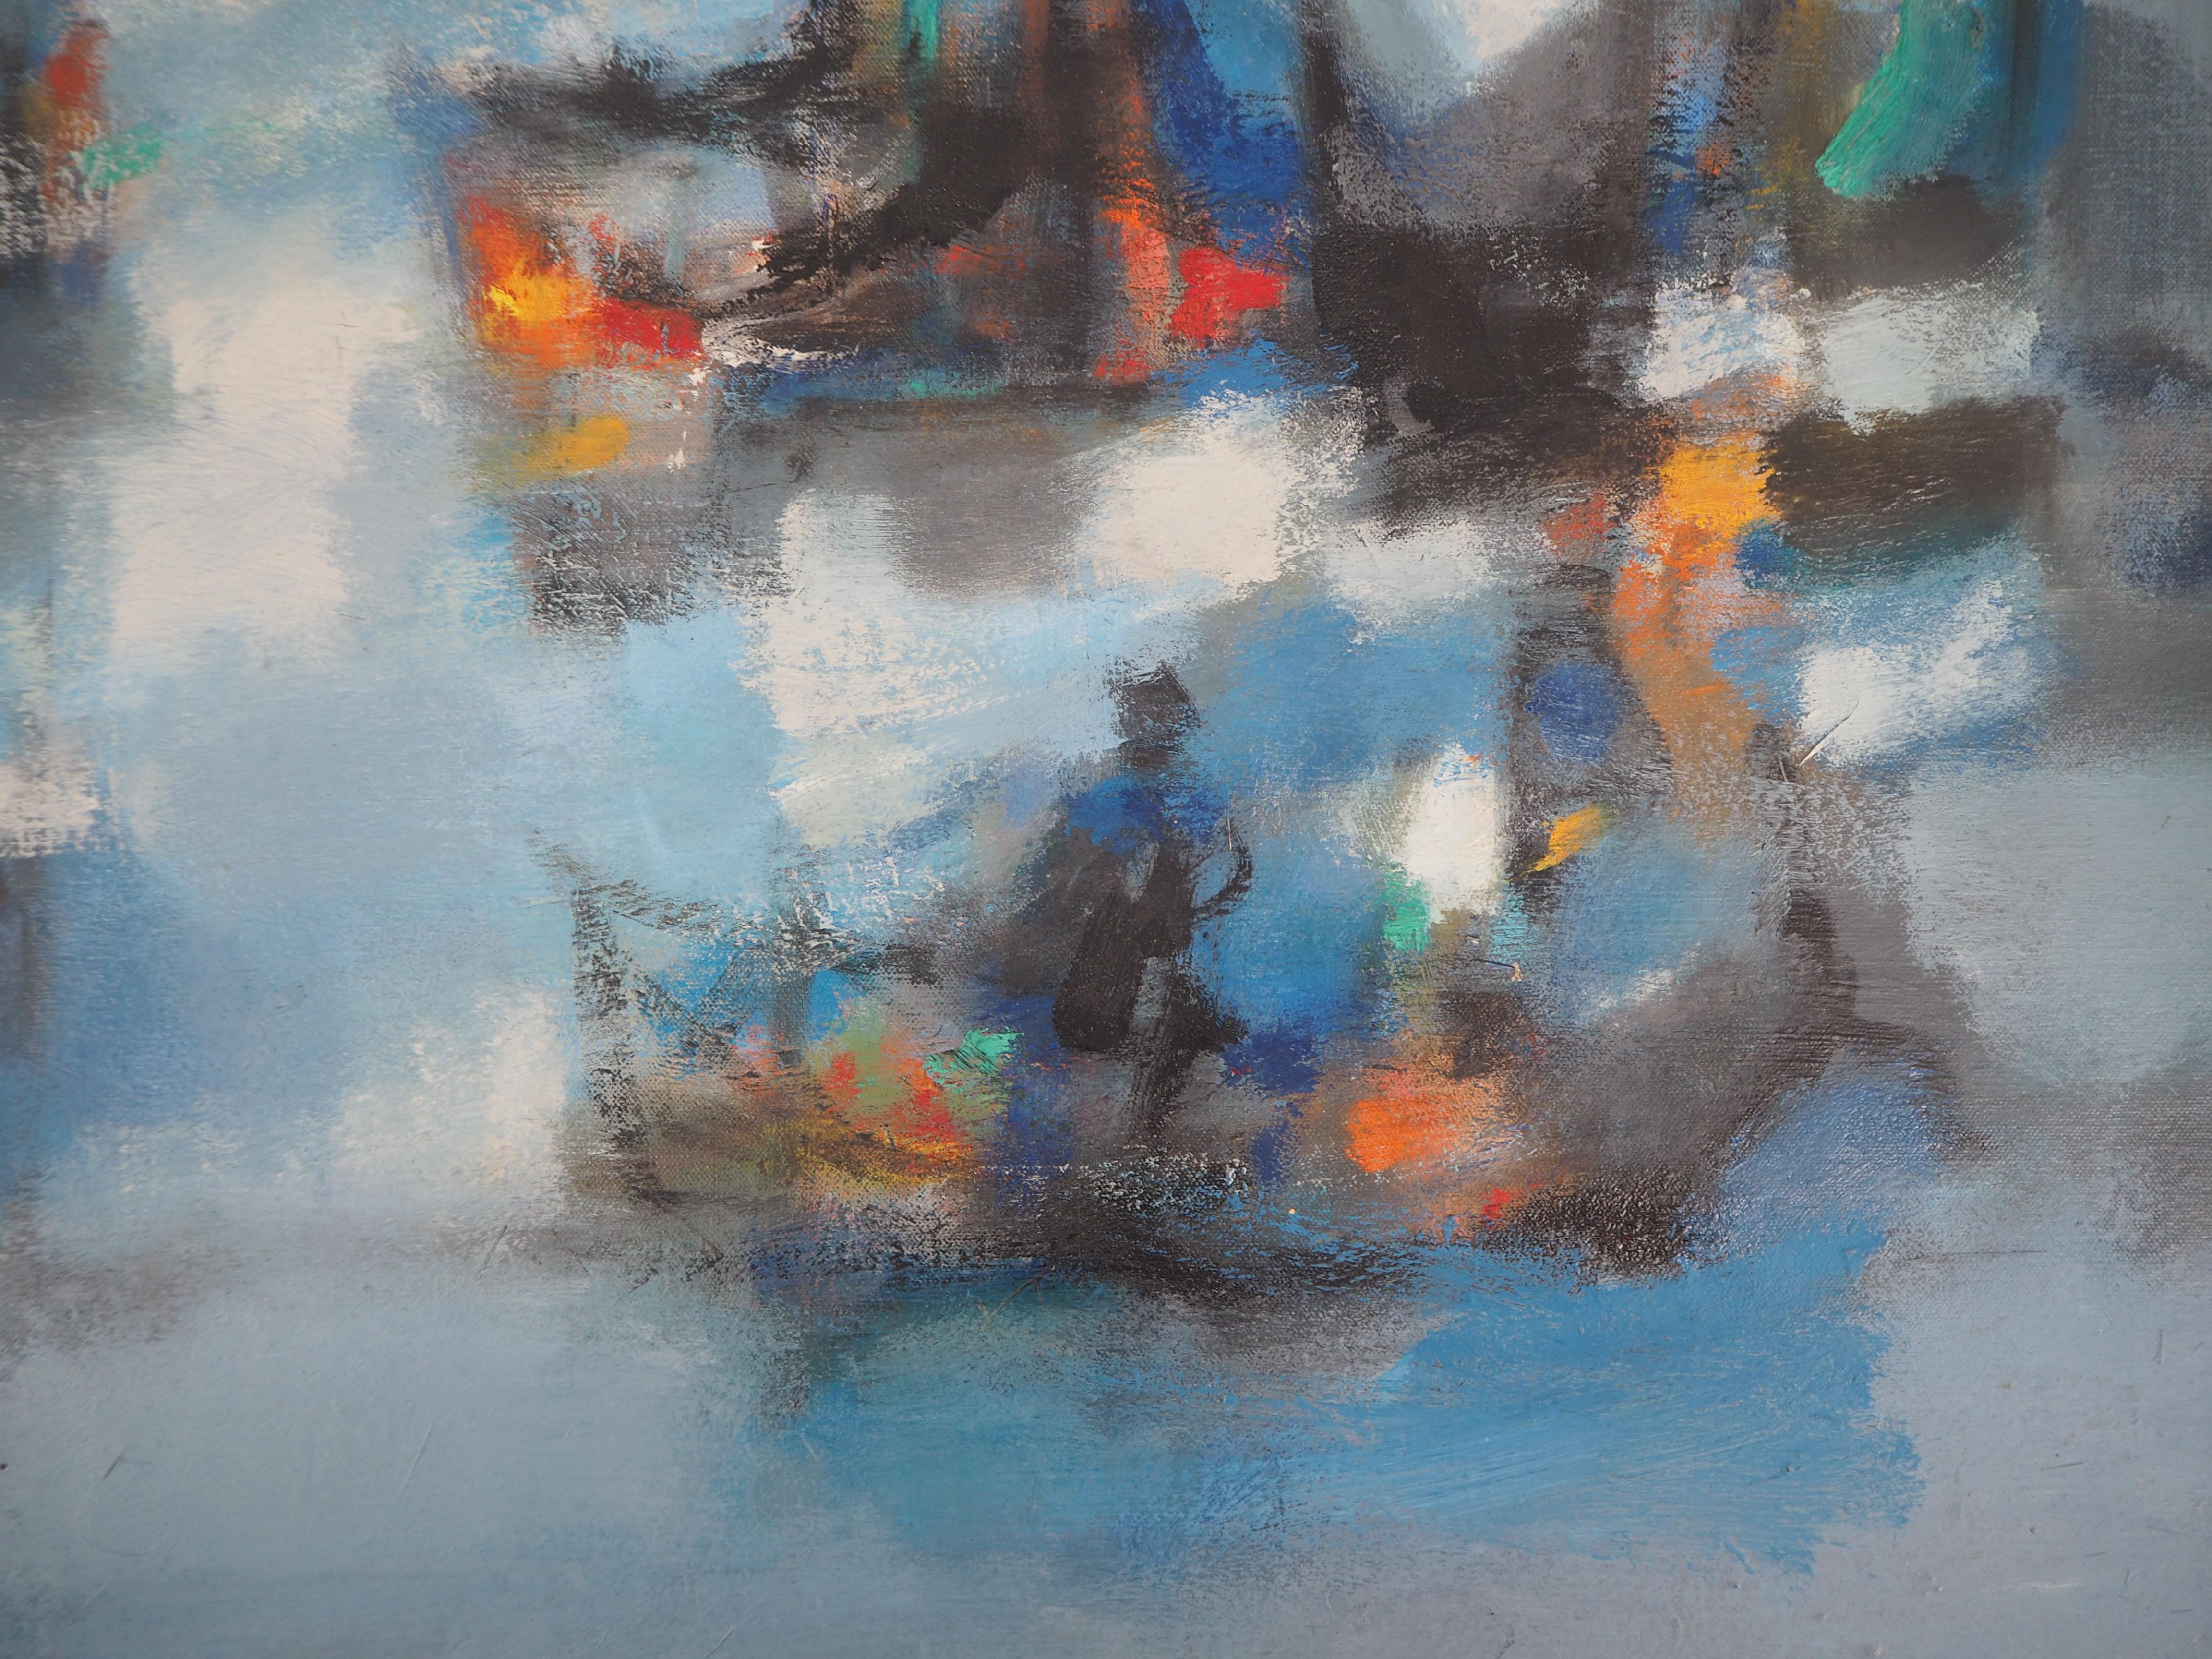 Boats : The Blue Sails - Original oil painting on canvas, Handsigned - Gray Landscape Painting by Marcel Mouly